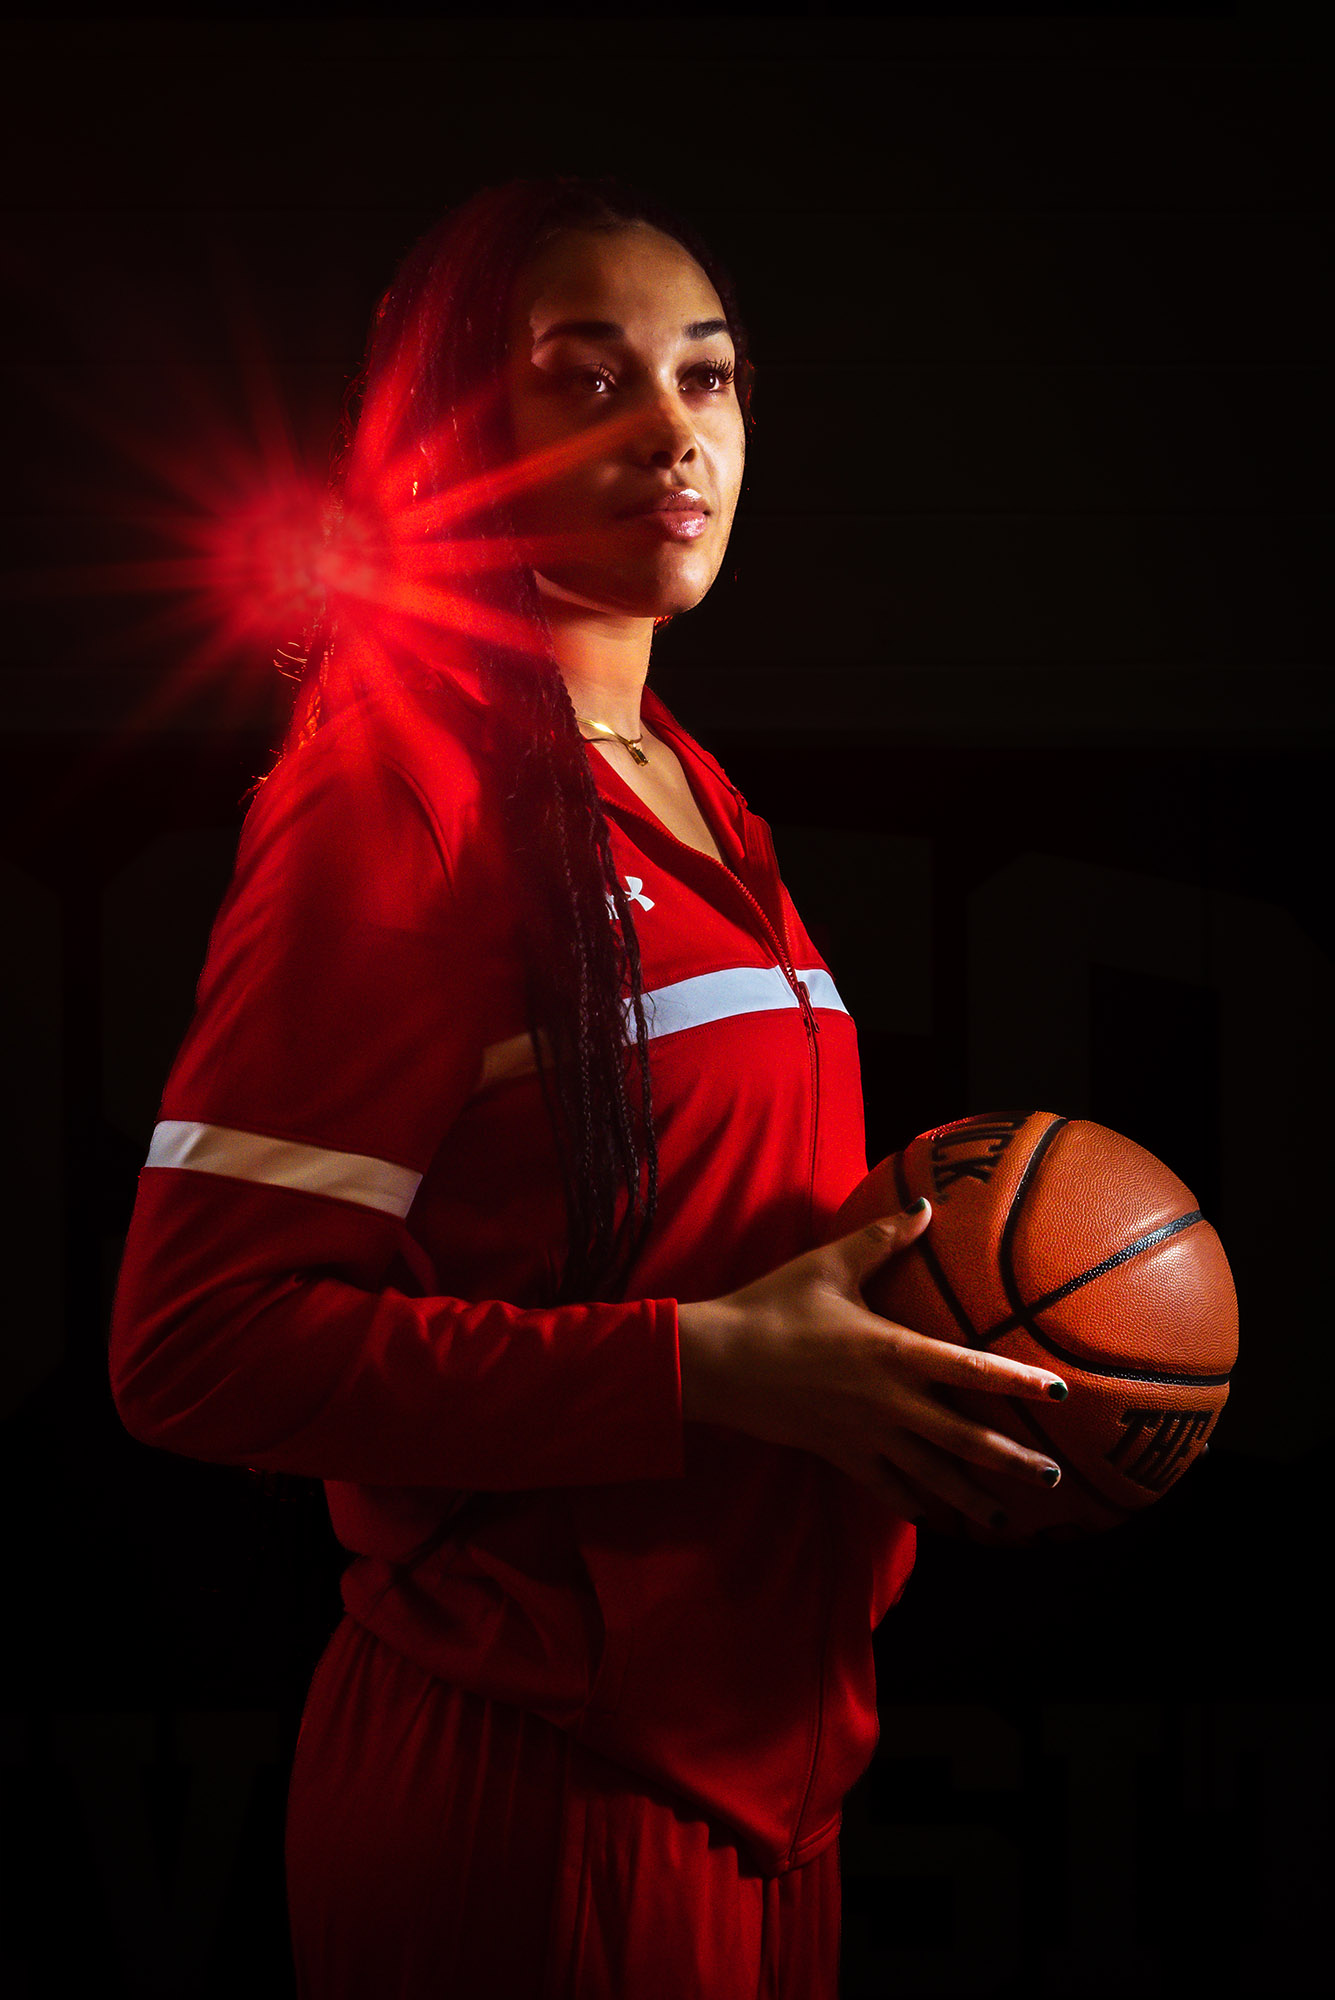 Photo: Women’s basketball player, Caitlin Weimar, poses for a photo with her red uniform. She holds a basketball, and stares to the right. A bright, red light shines behinds her head.